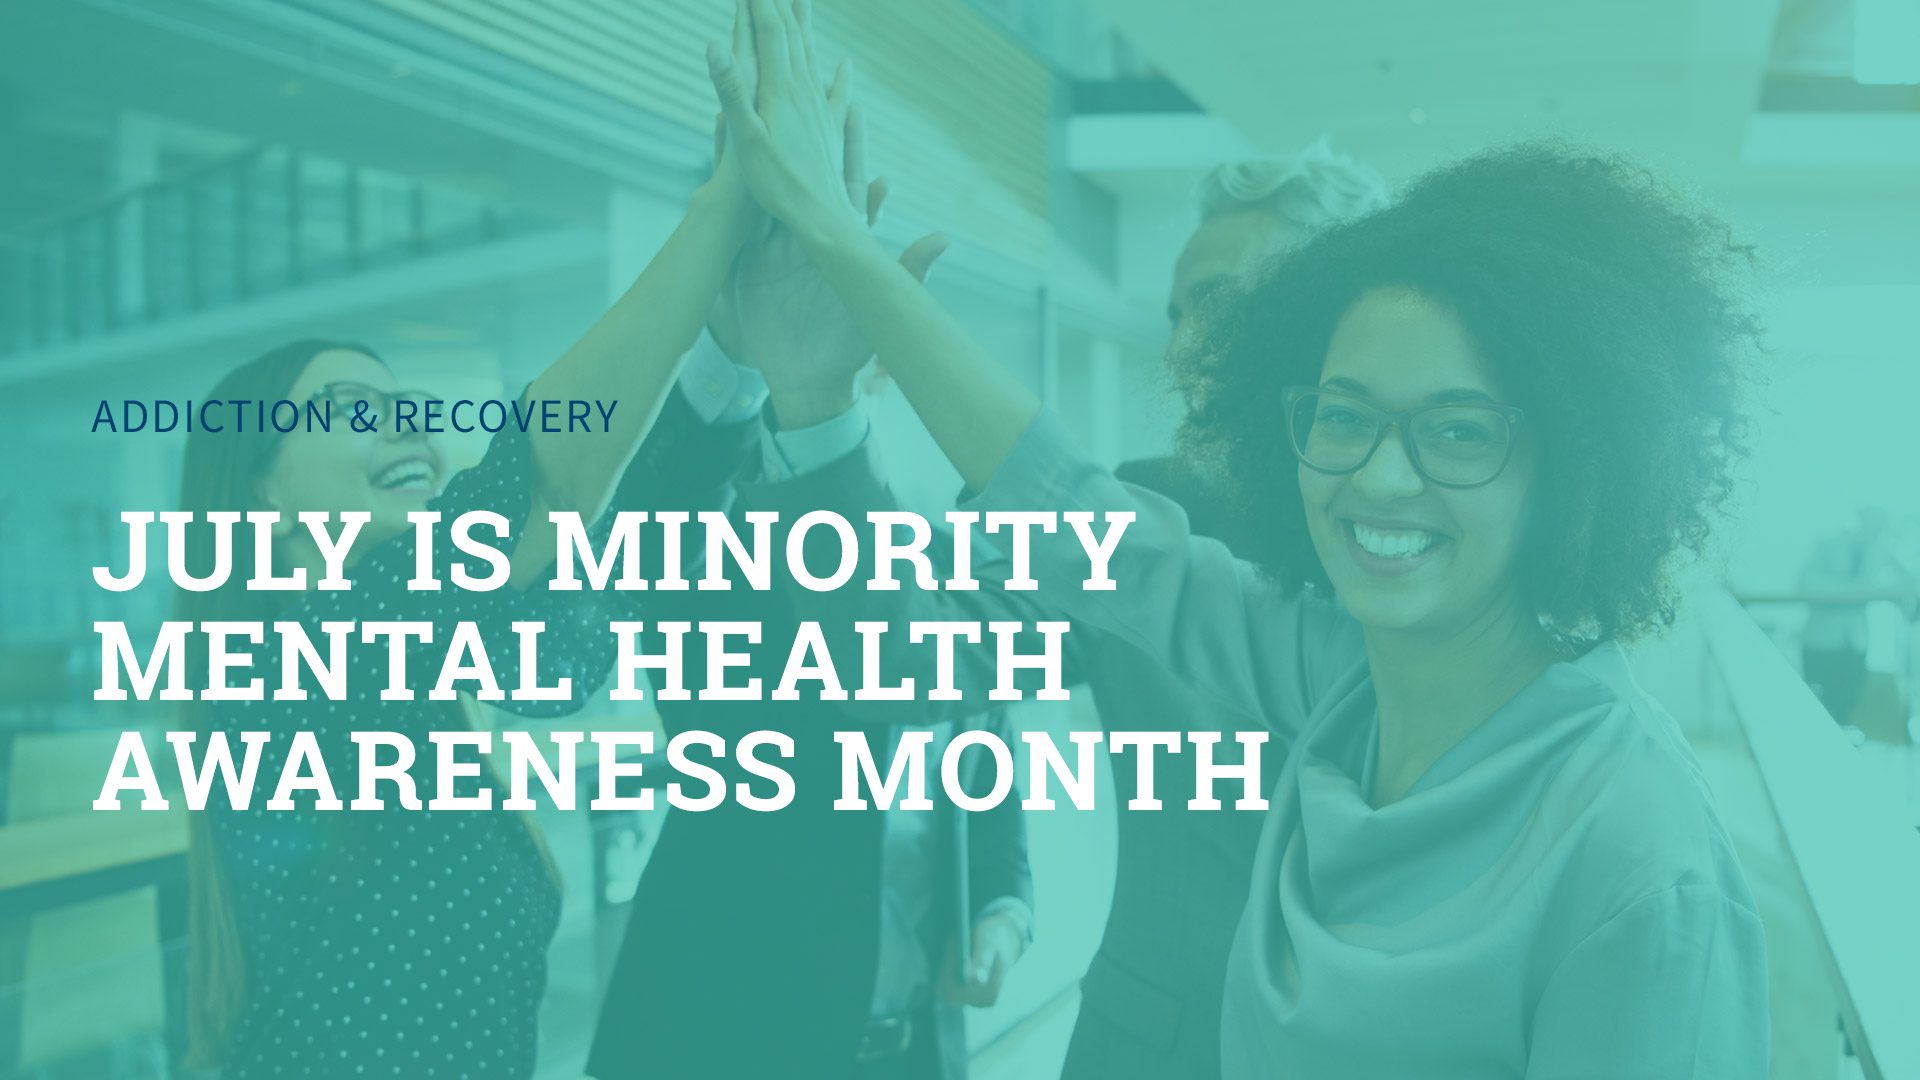 July is Minority Mental Health Awareness Month Pinnacle Treatment Centers